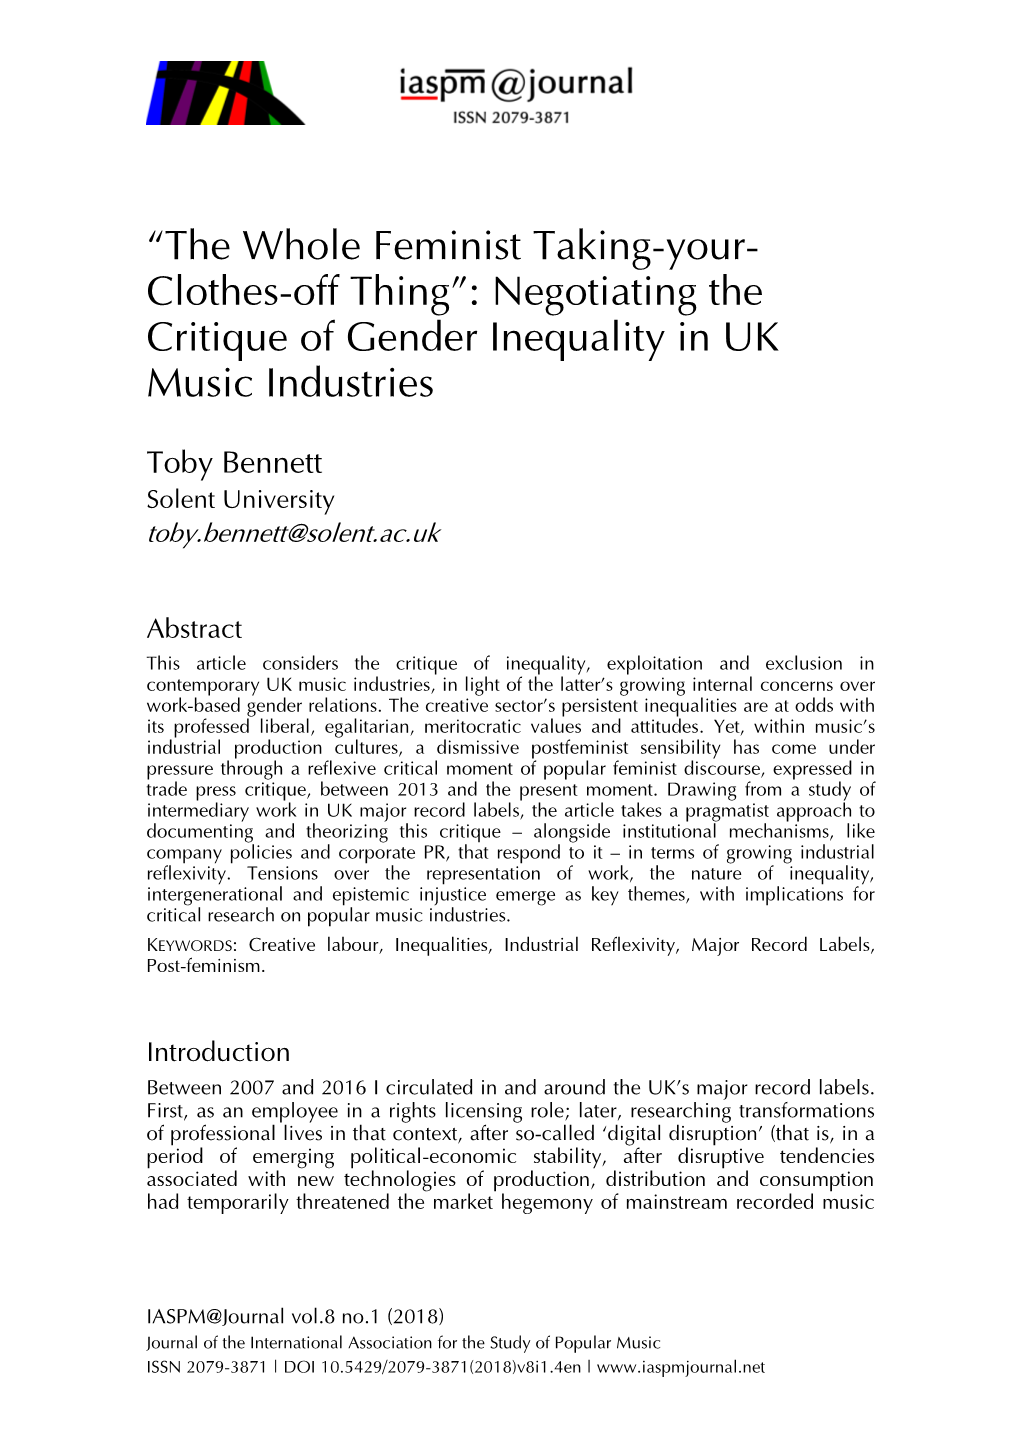 Negotiating the Critique of Gender Inequality in UK Music Industries